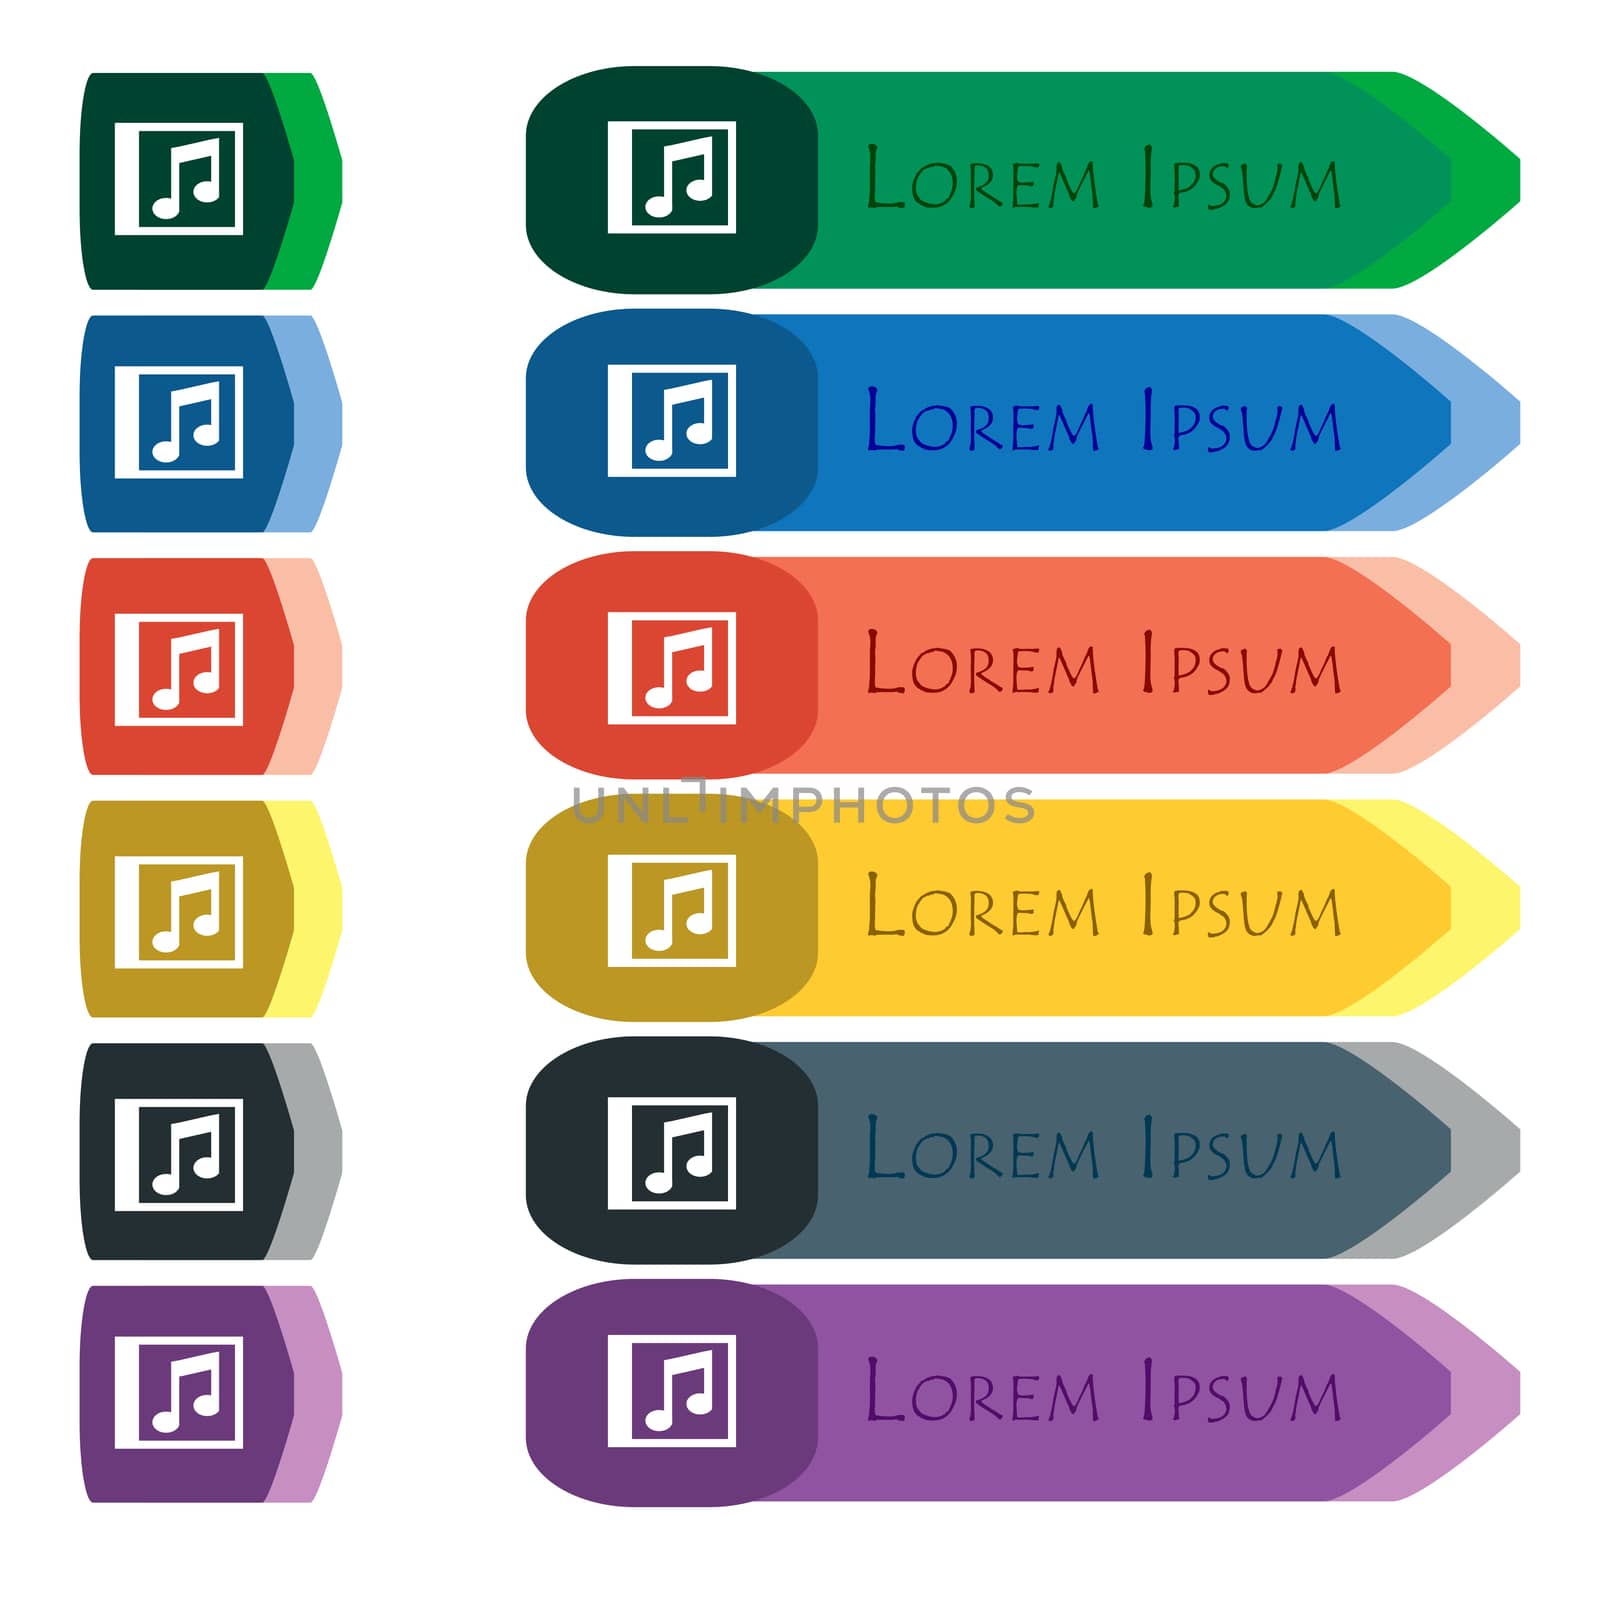 Audio, MP3 file icon sign. Set of colorful, bright long buttons with additional small modules. Flat design. 